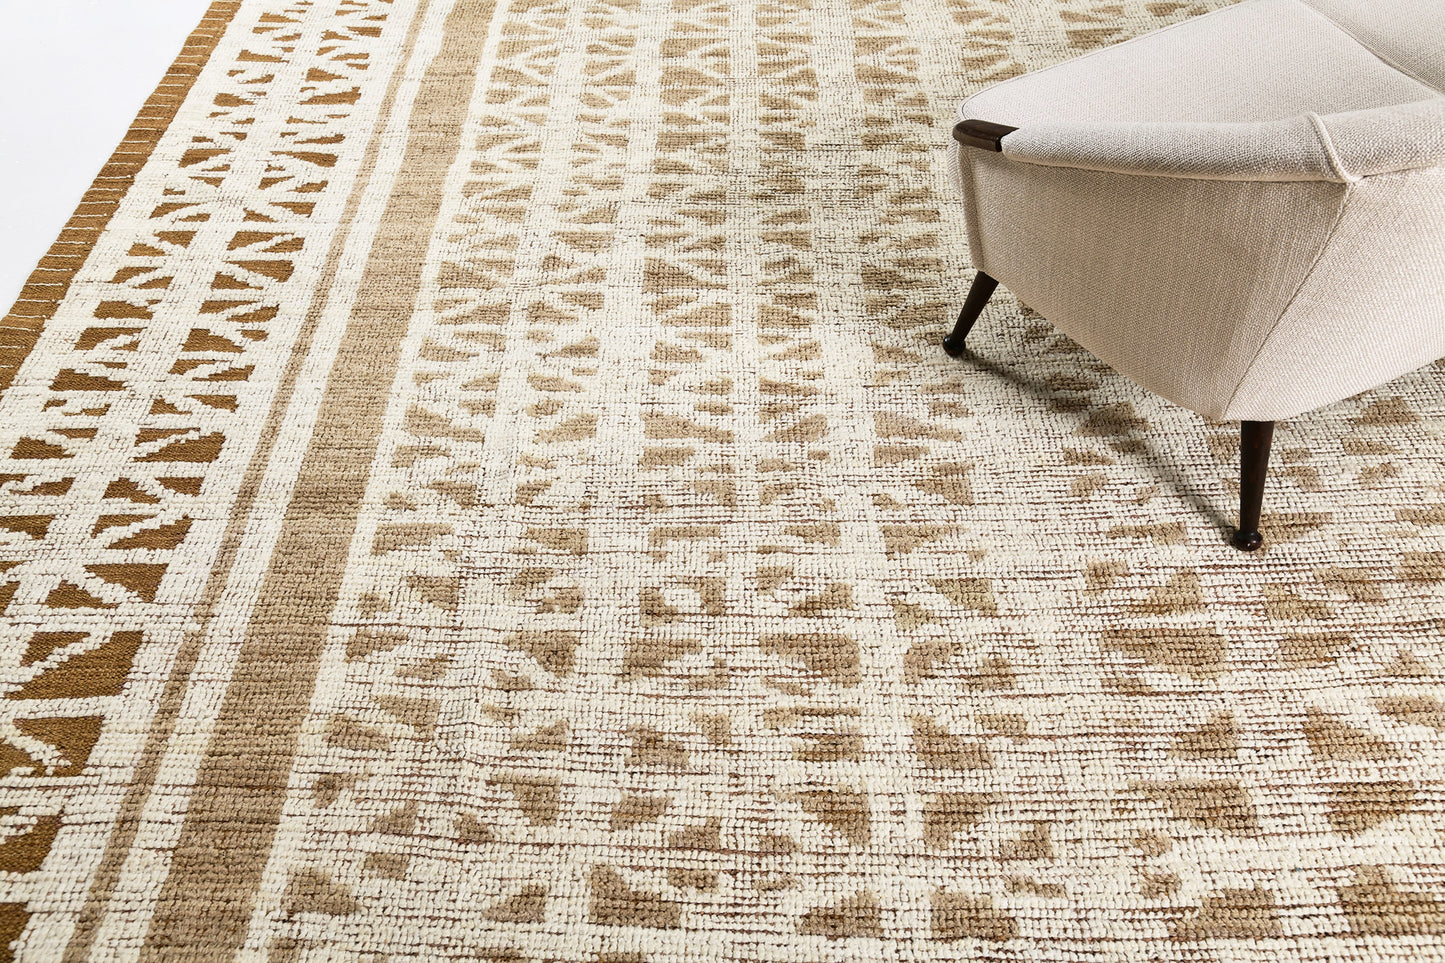 Modern Rug Image 5177 Hoopo, Nomad Collection